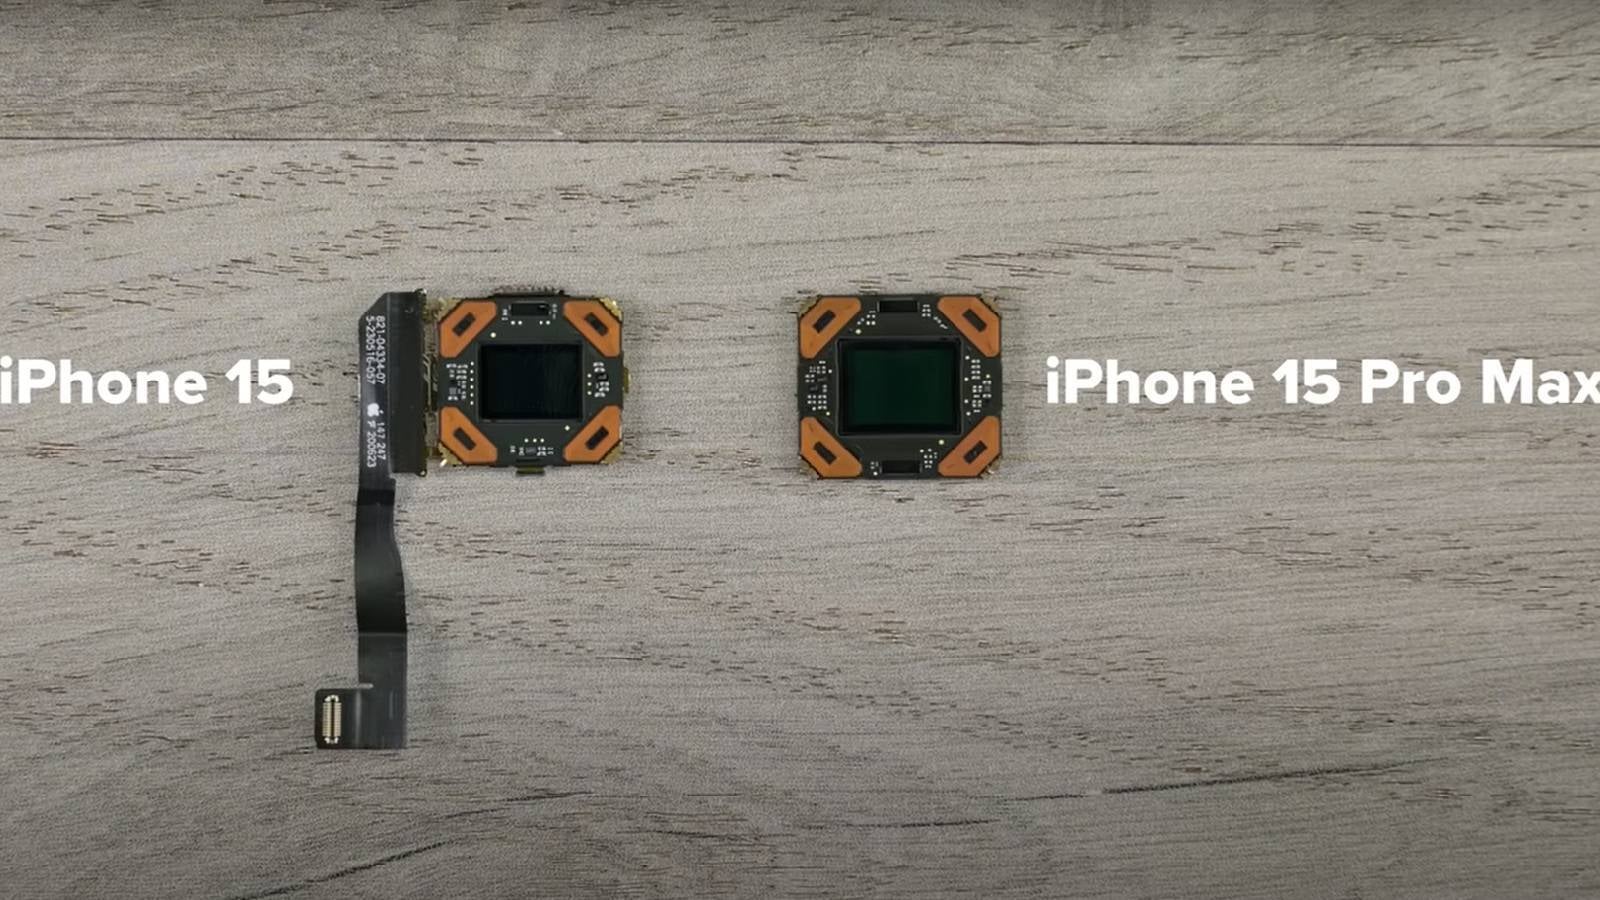 iPhone 15 vs iPhone 15 Pro Max main cameras - Microscopic image shows significant size difference between iPhone 15 and Pro Max's 48MP cameras